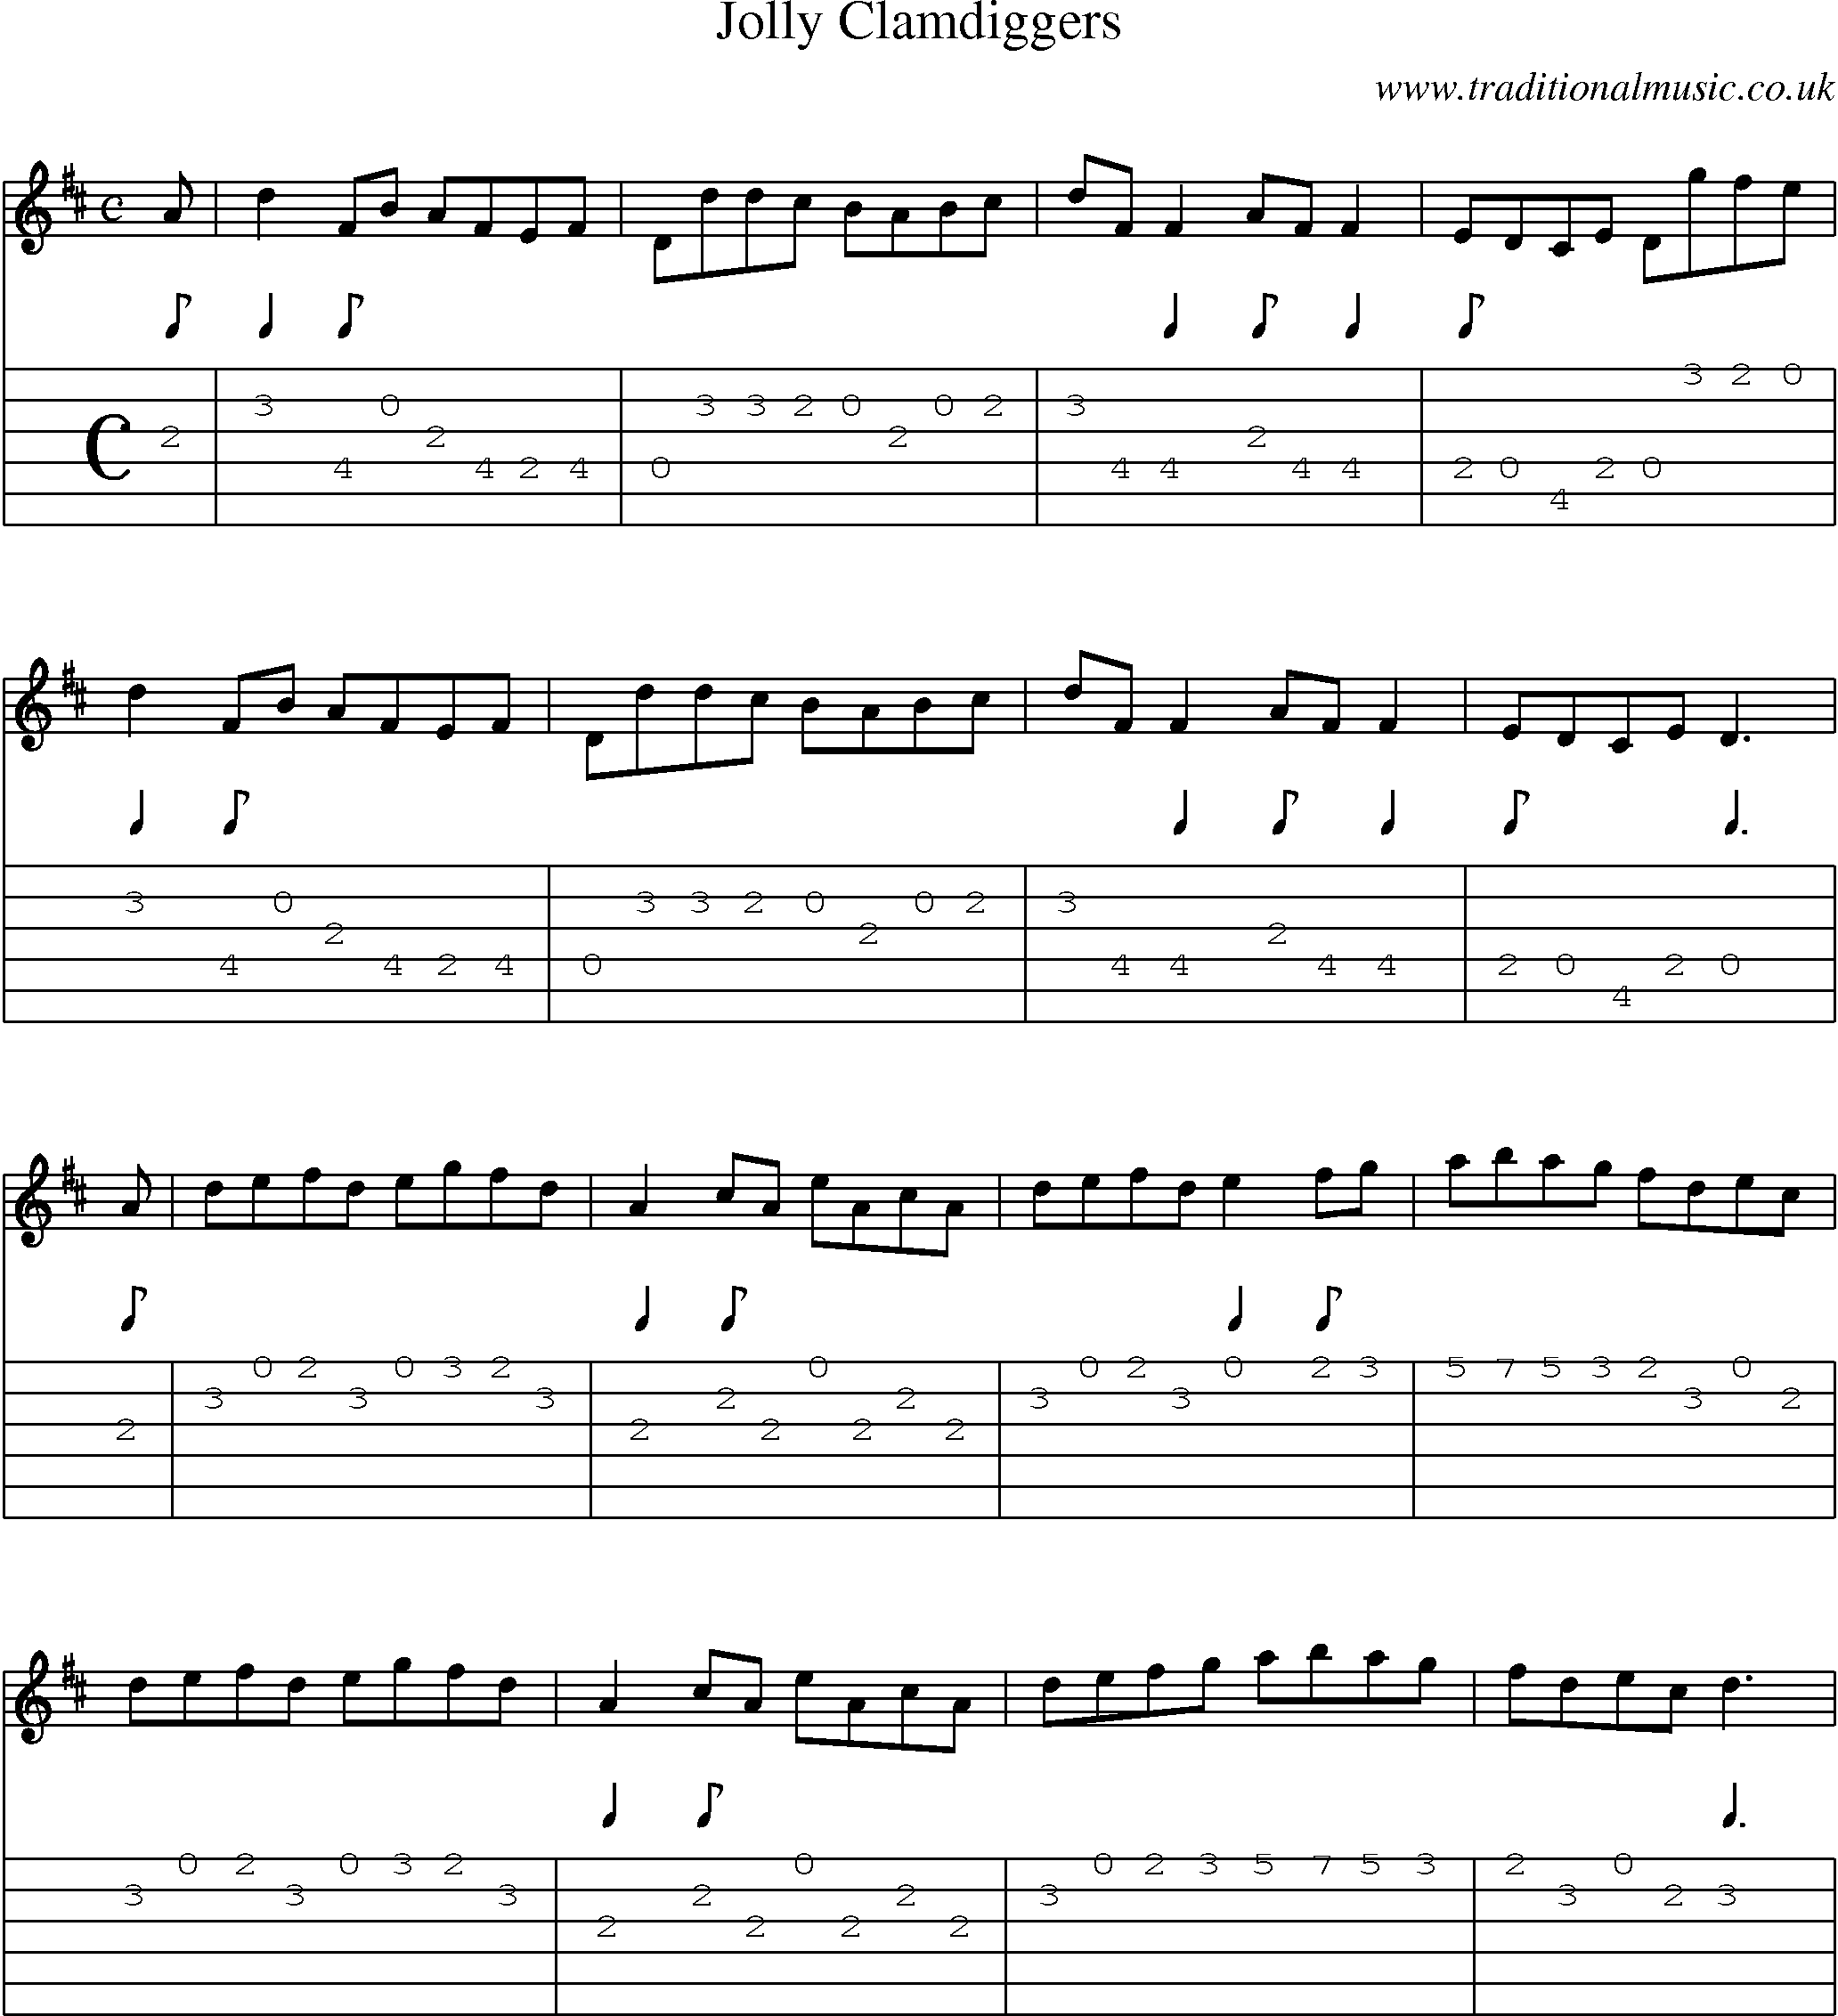 Music Score and Guitar Tabs for Jolly Clamdiggers